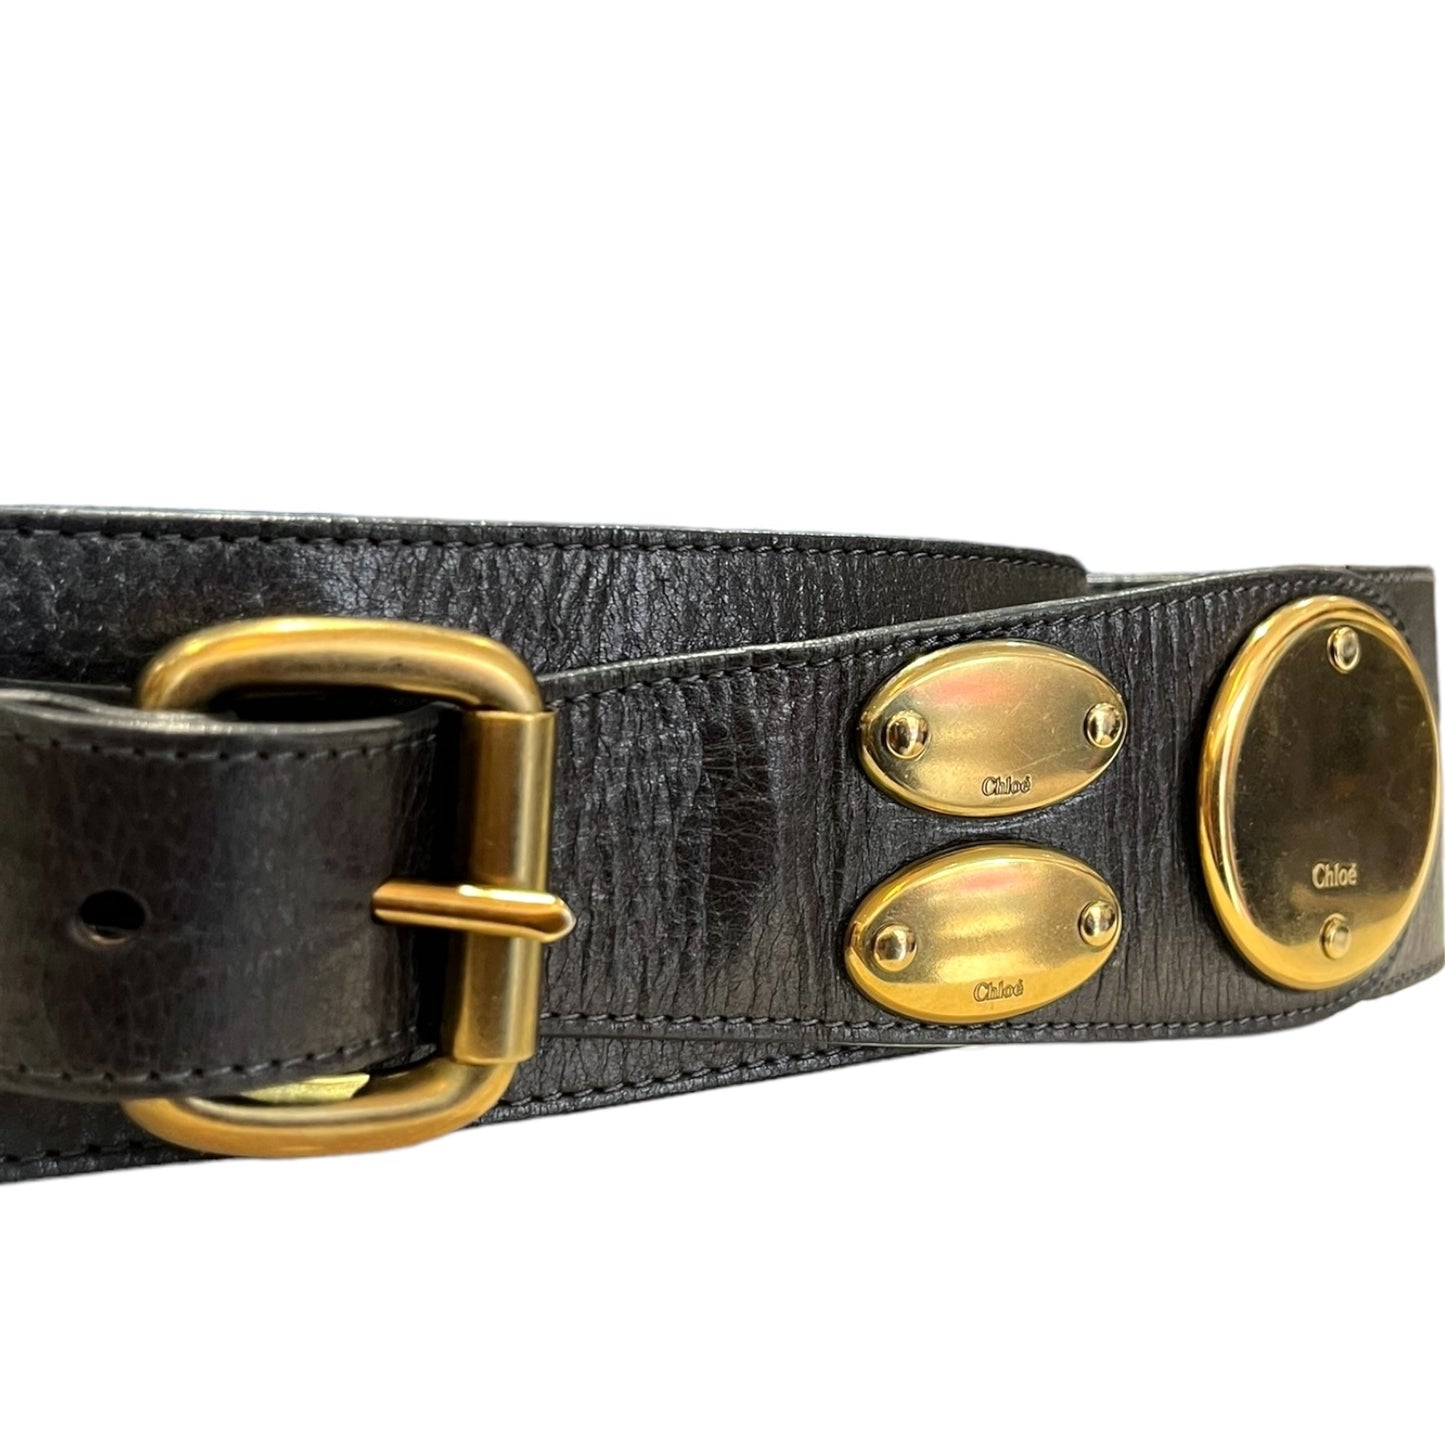 Chloé Black and Gold Leather Belt